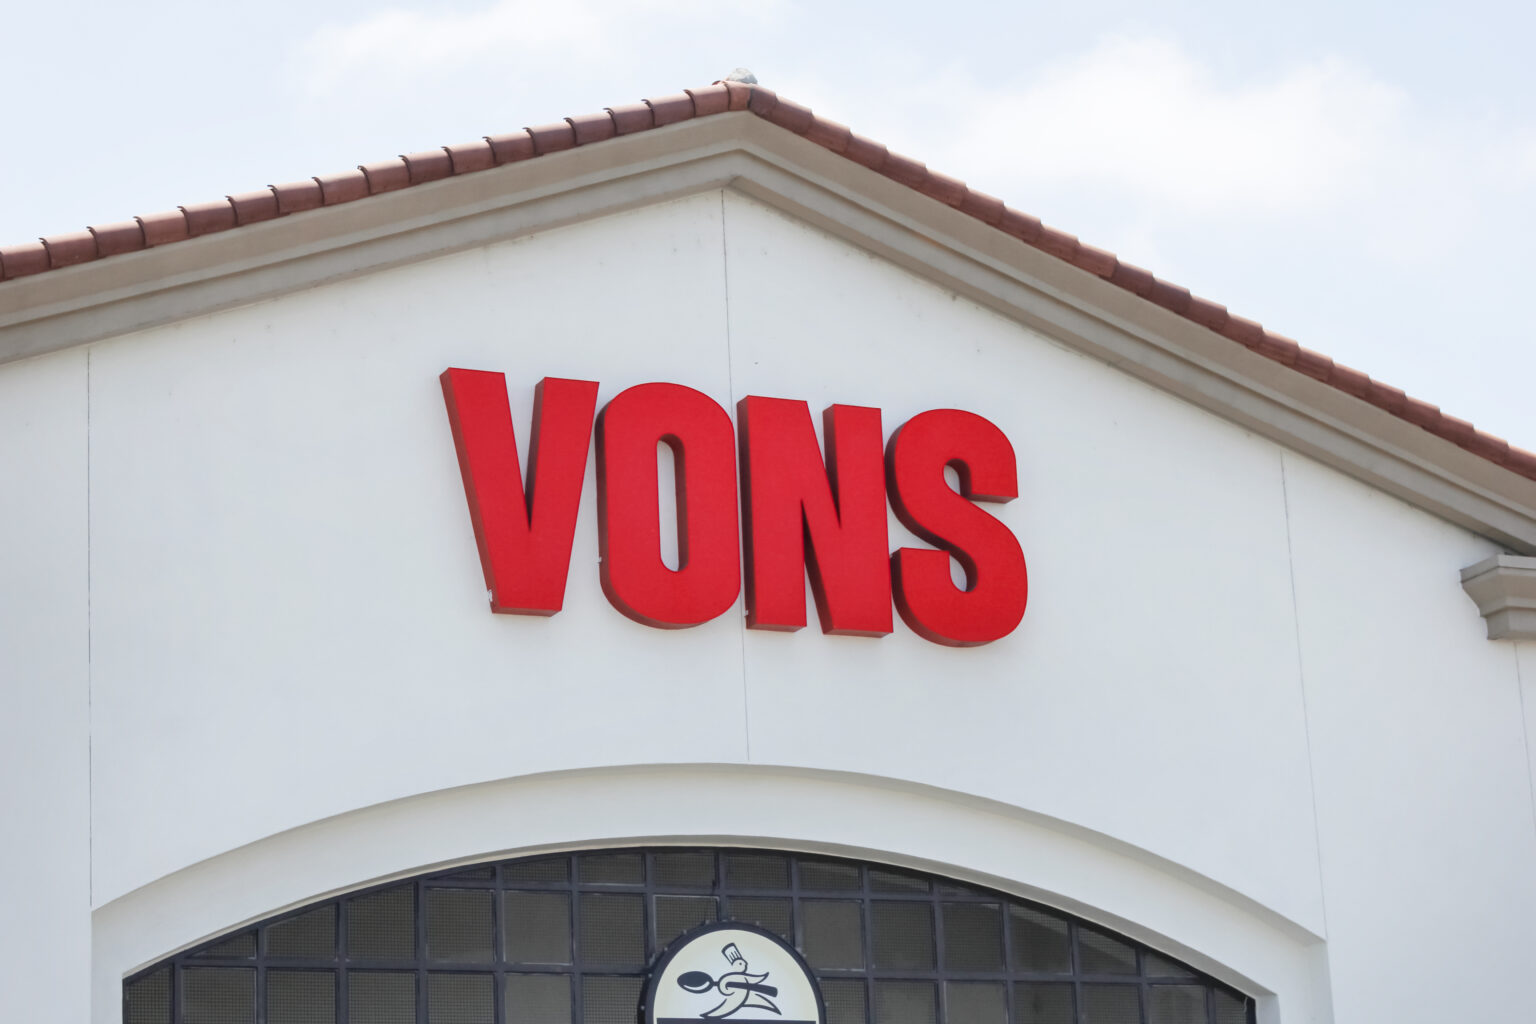 Vons sign above the front entrance of a store